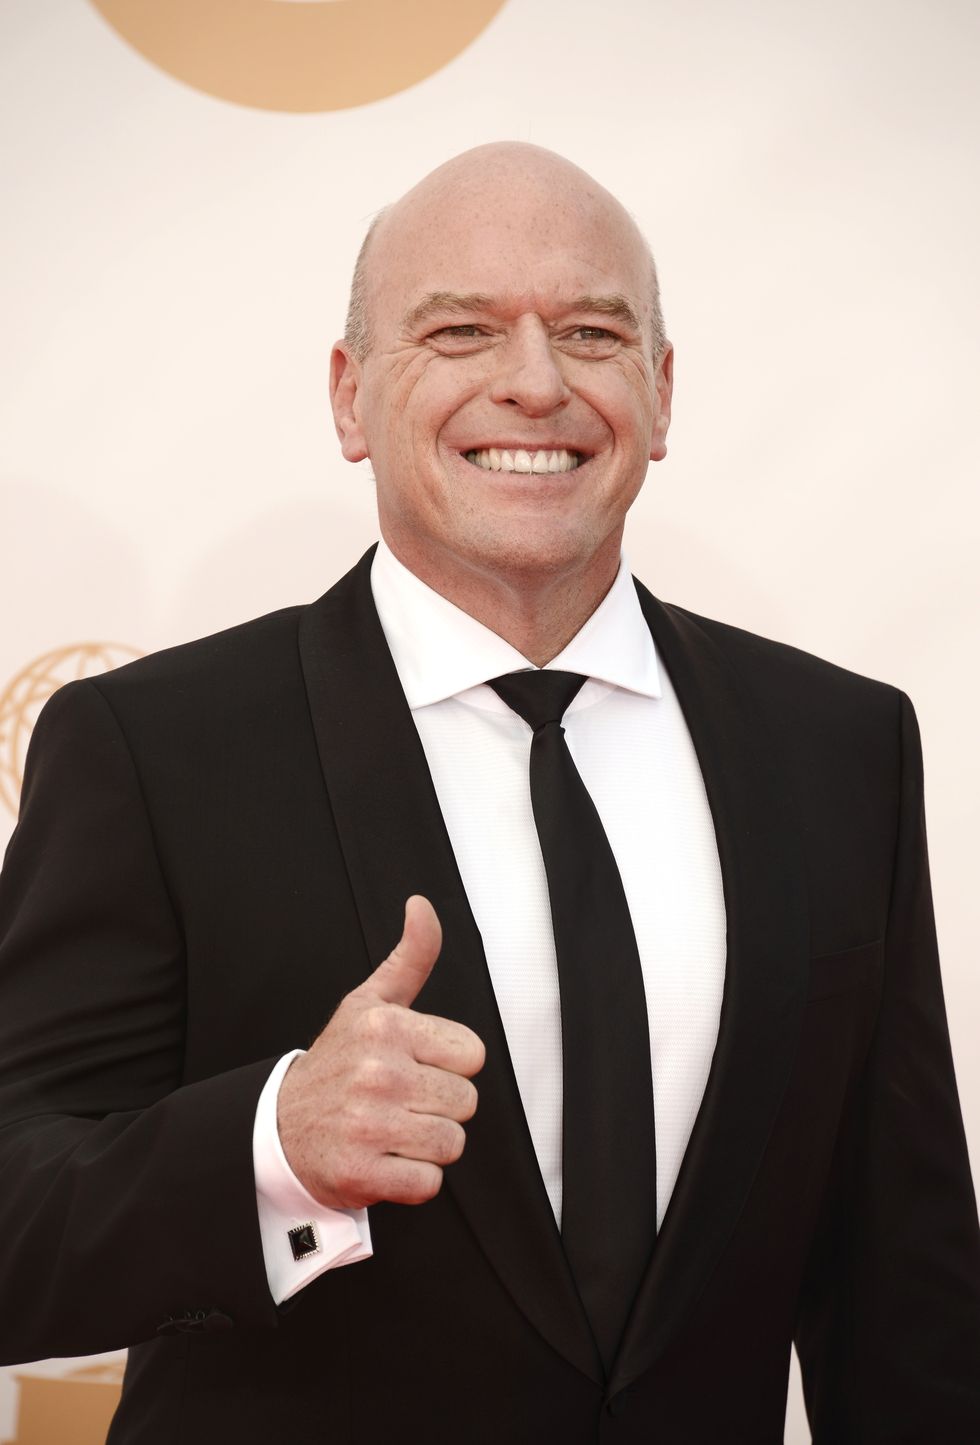 Breaking Bad' actor Dean Norris to Americans complaining about